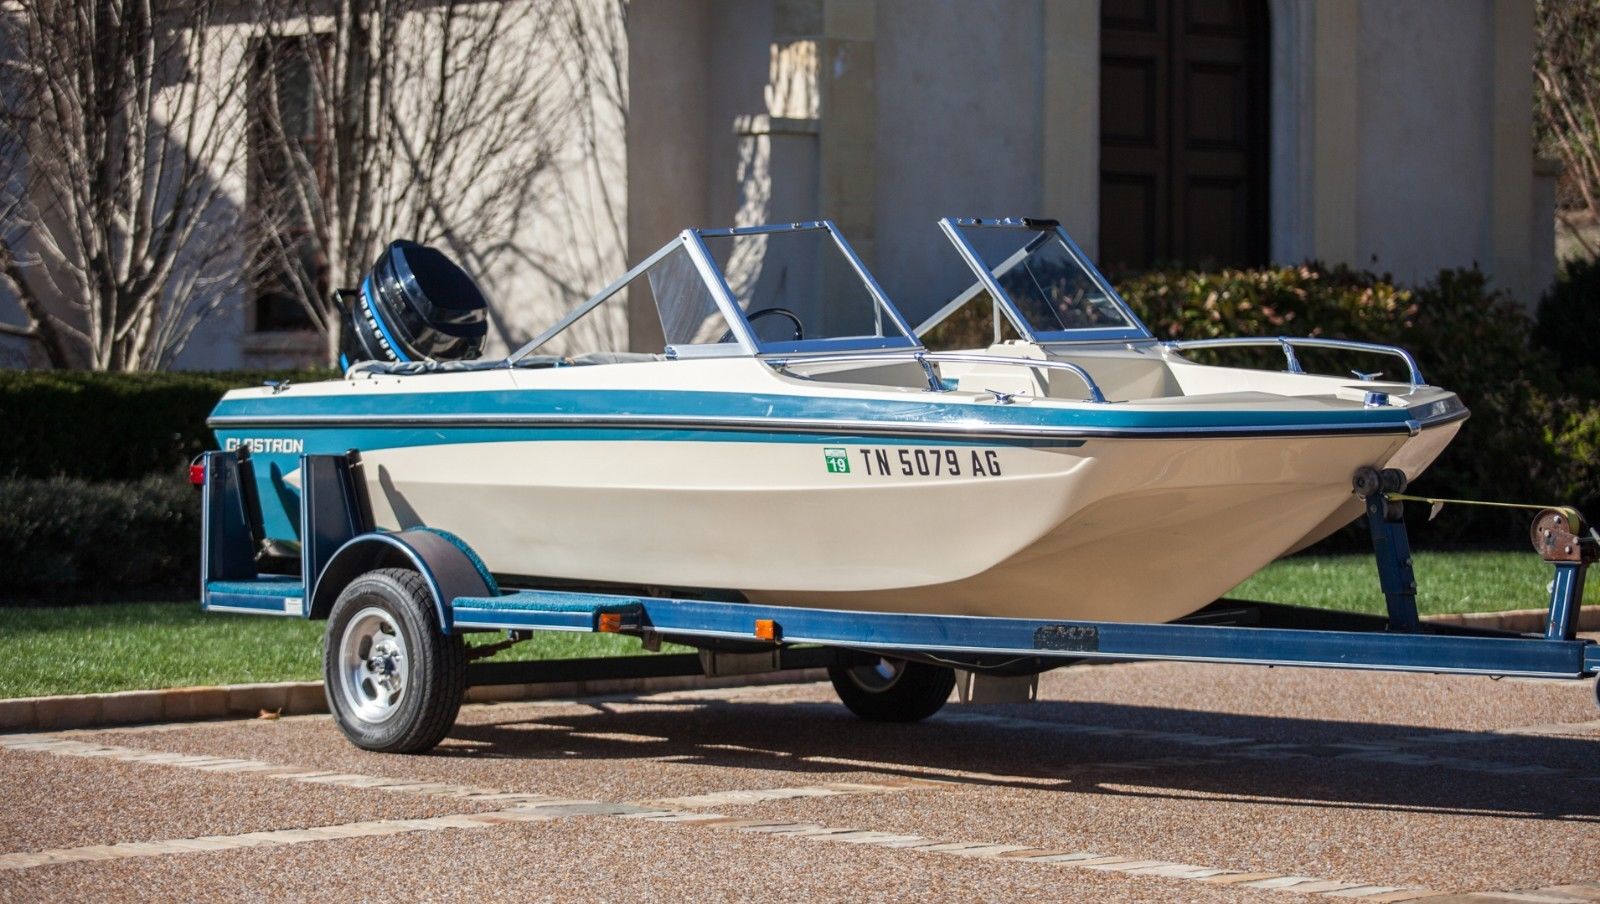 Glastron T166 Sportster 1977 for sale for $1,000 - Boats-from-USA.com